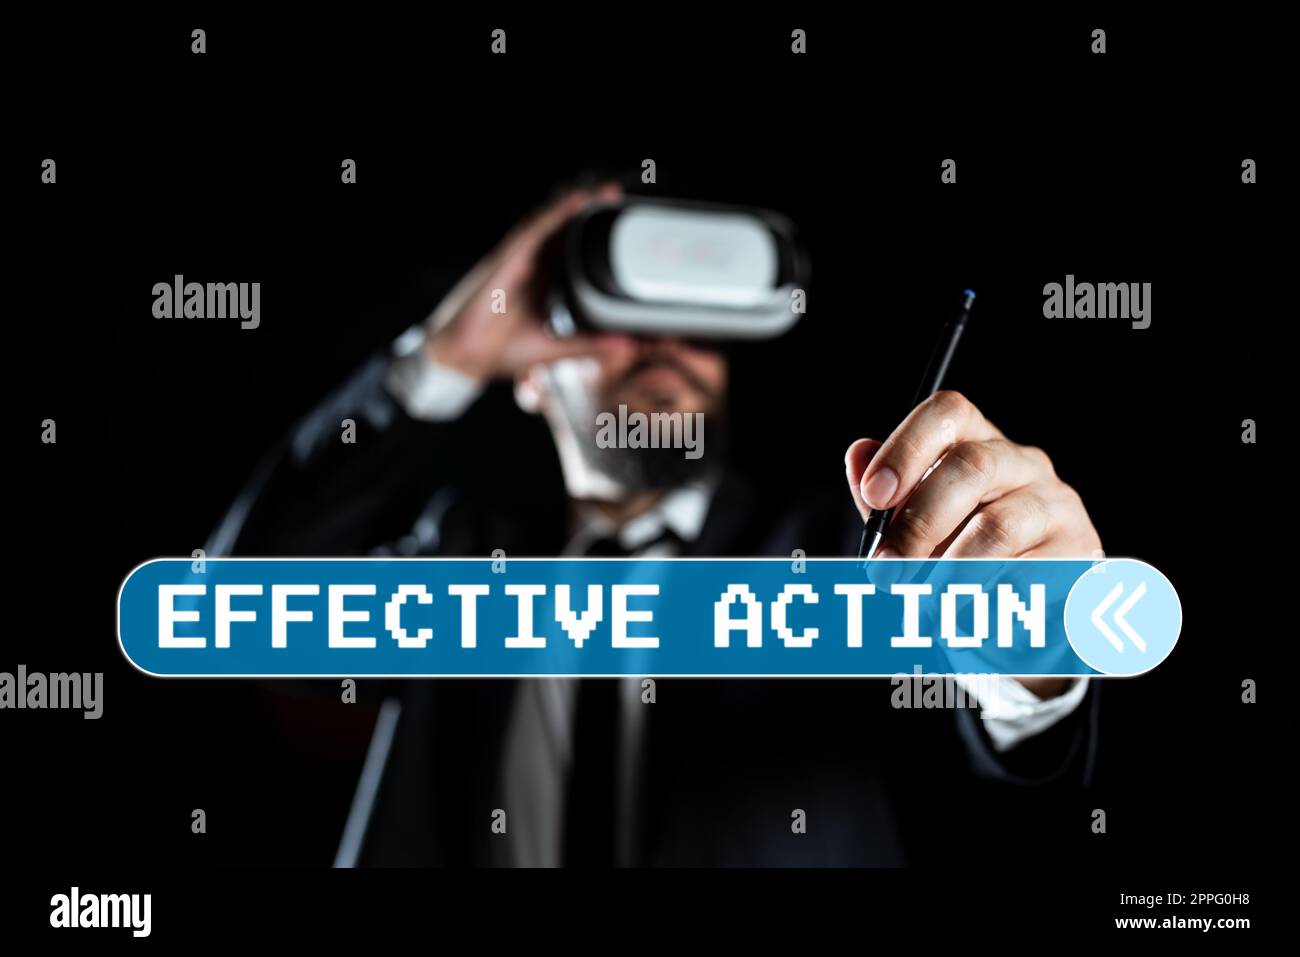 Text showing inspiration Effective Action. Word for producing the intended purpose or expected result Stock Photo